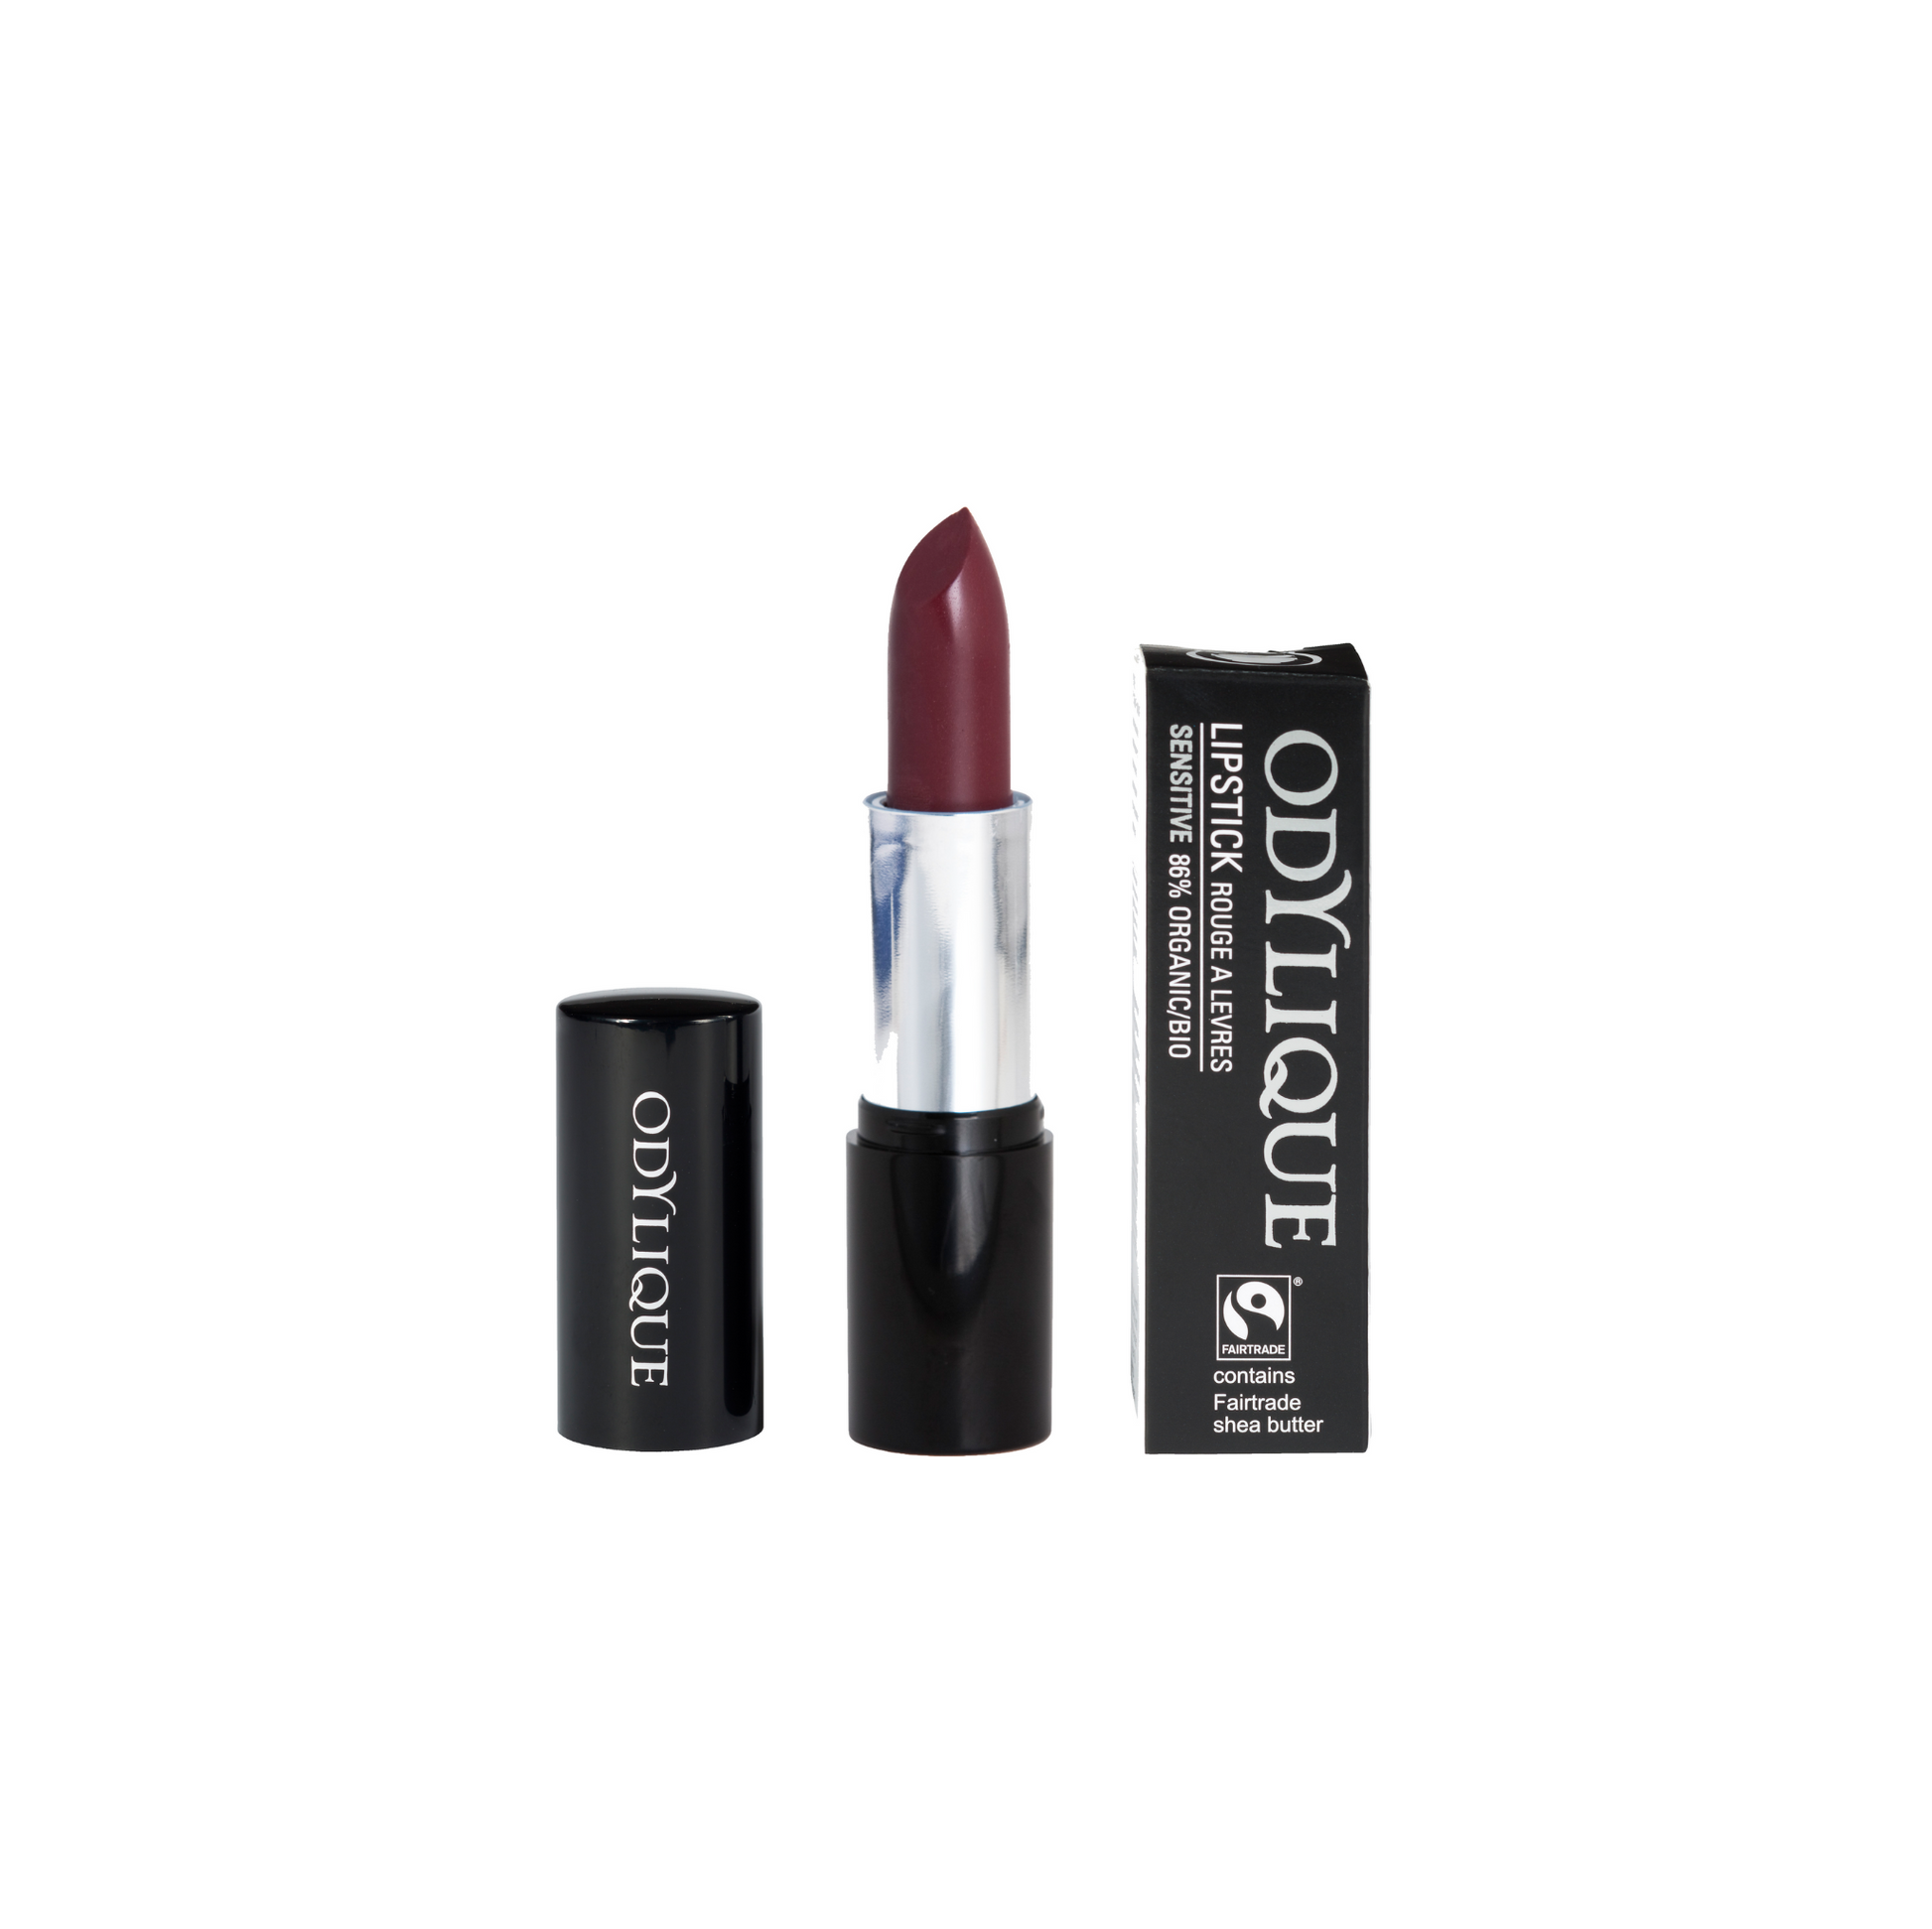 Odylique lipstick in blackberry smoothie (deliciously deep mauve) partially twisted up from its black tube, positioned next to its packaging.